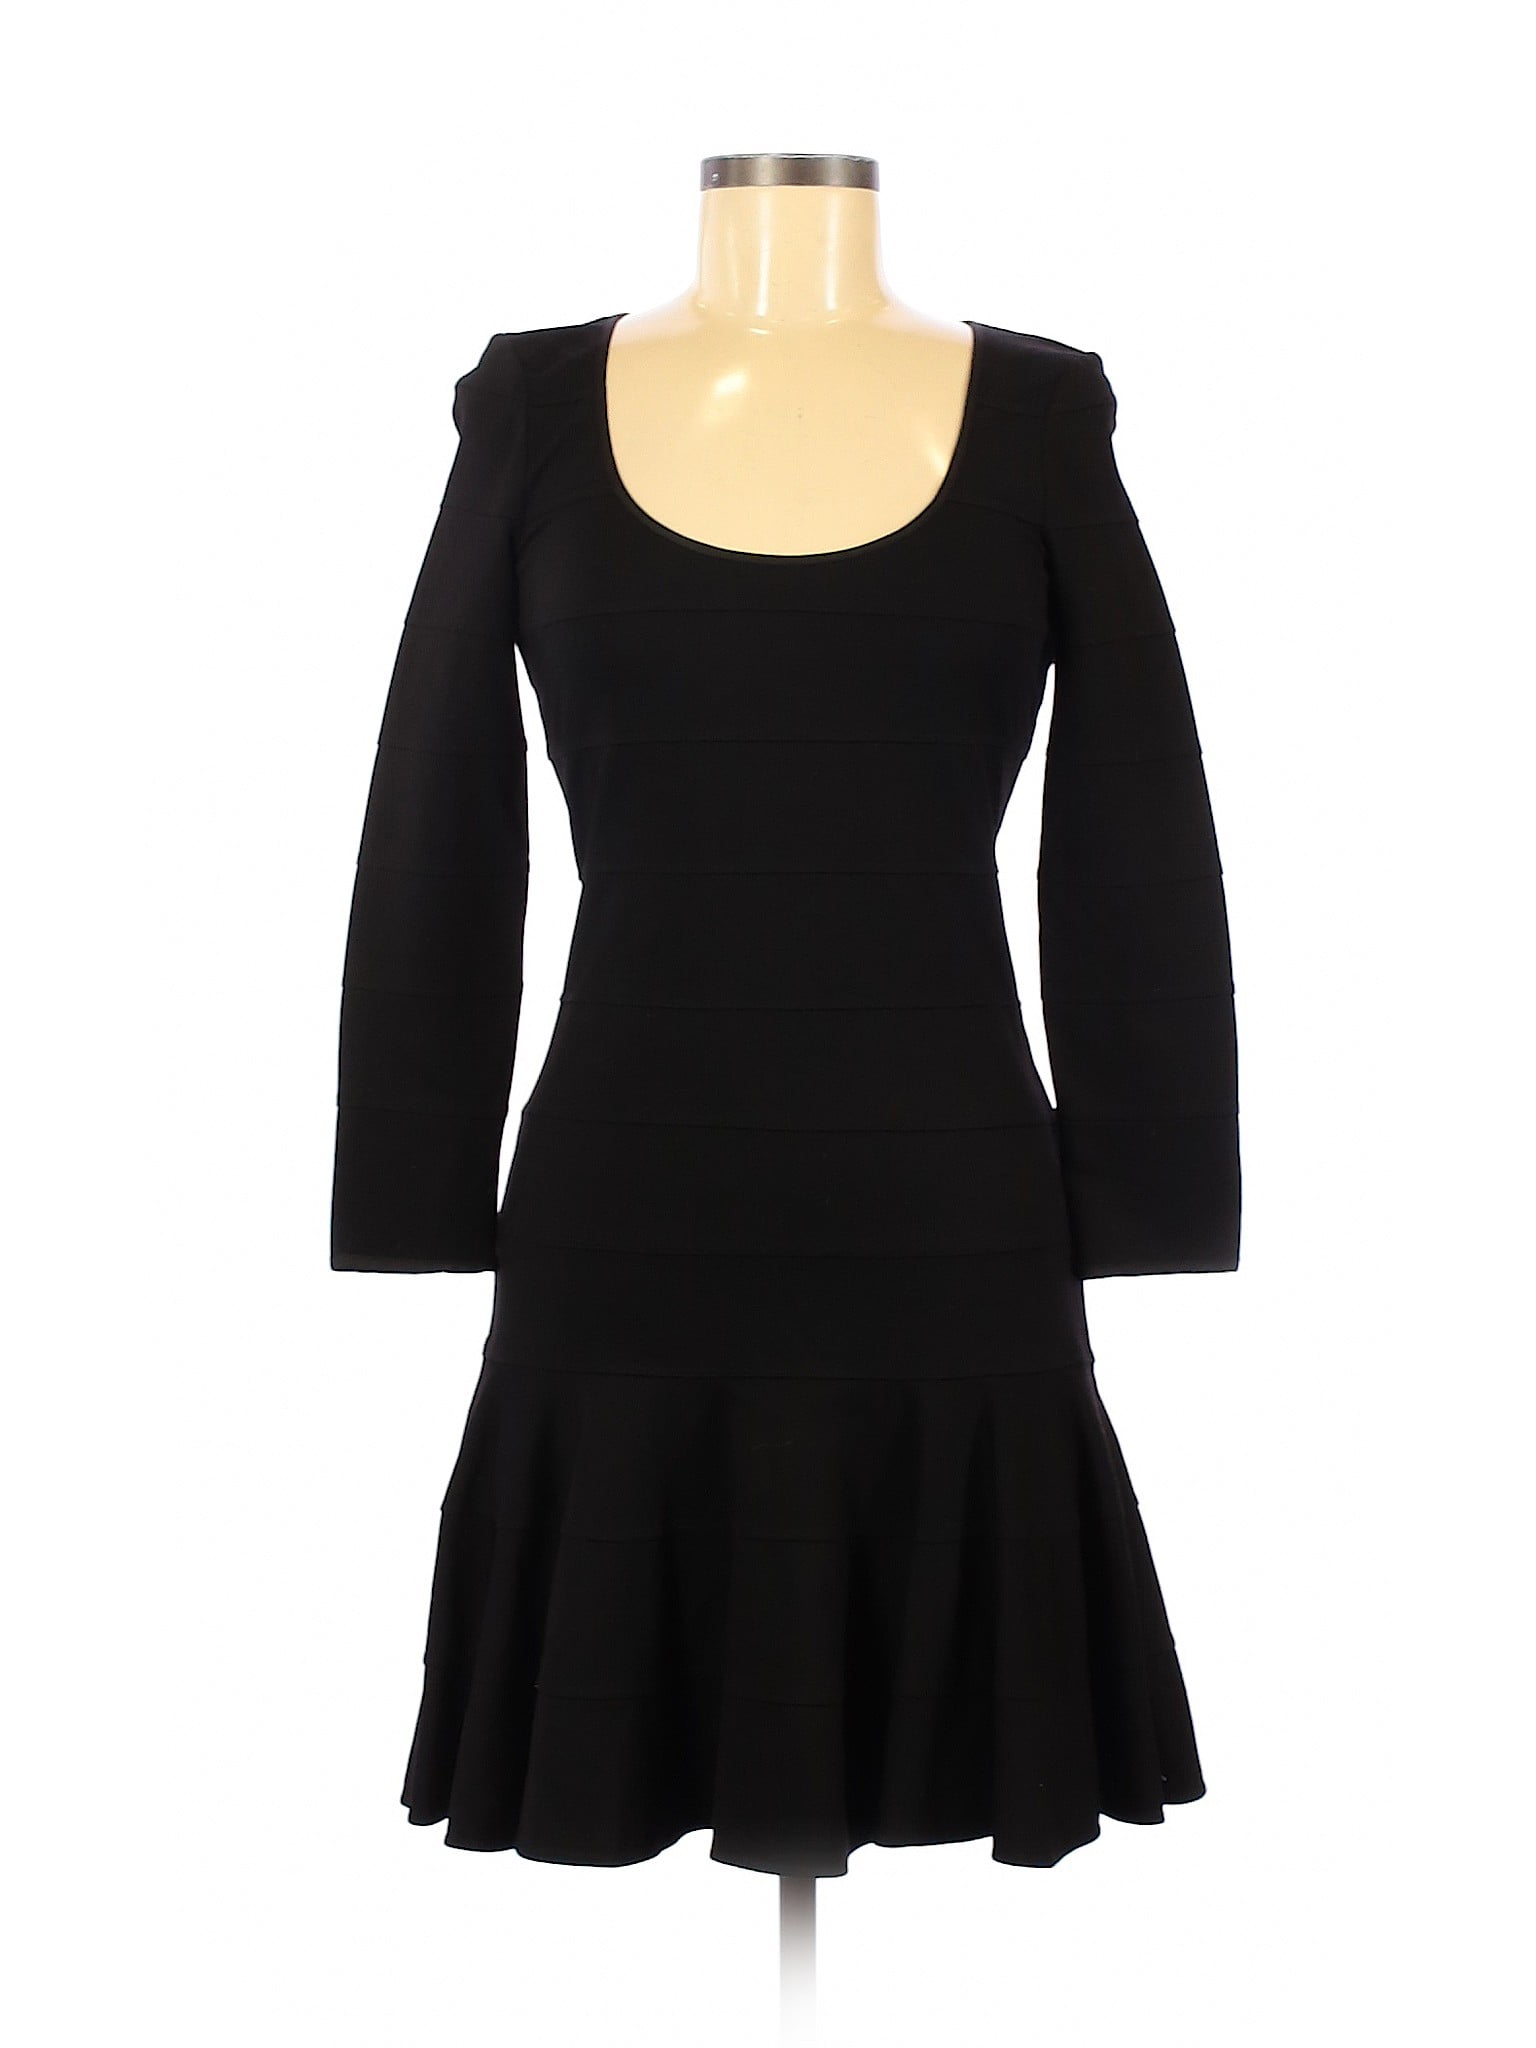 Juicy Couture - Pre-Owned Juicy Couture Black Label Women's Size 6 ...